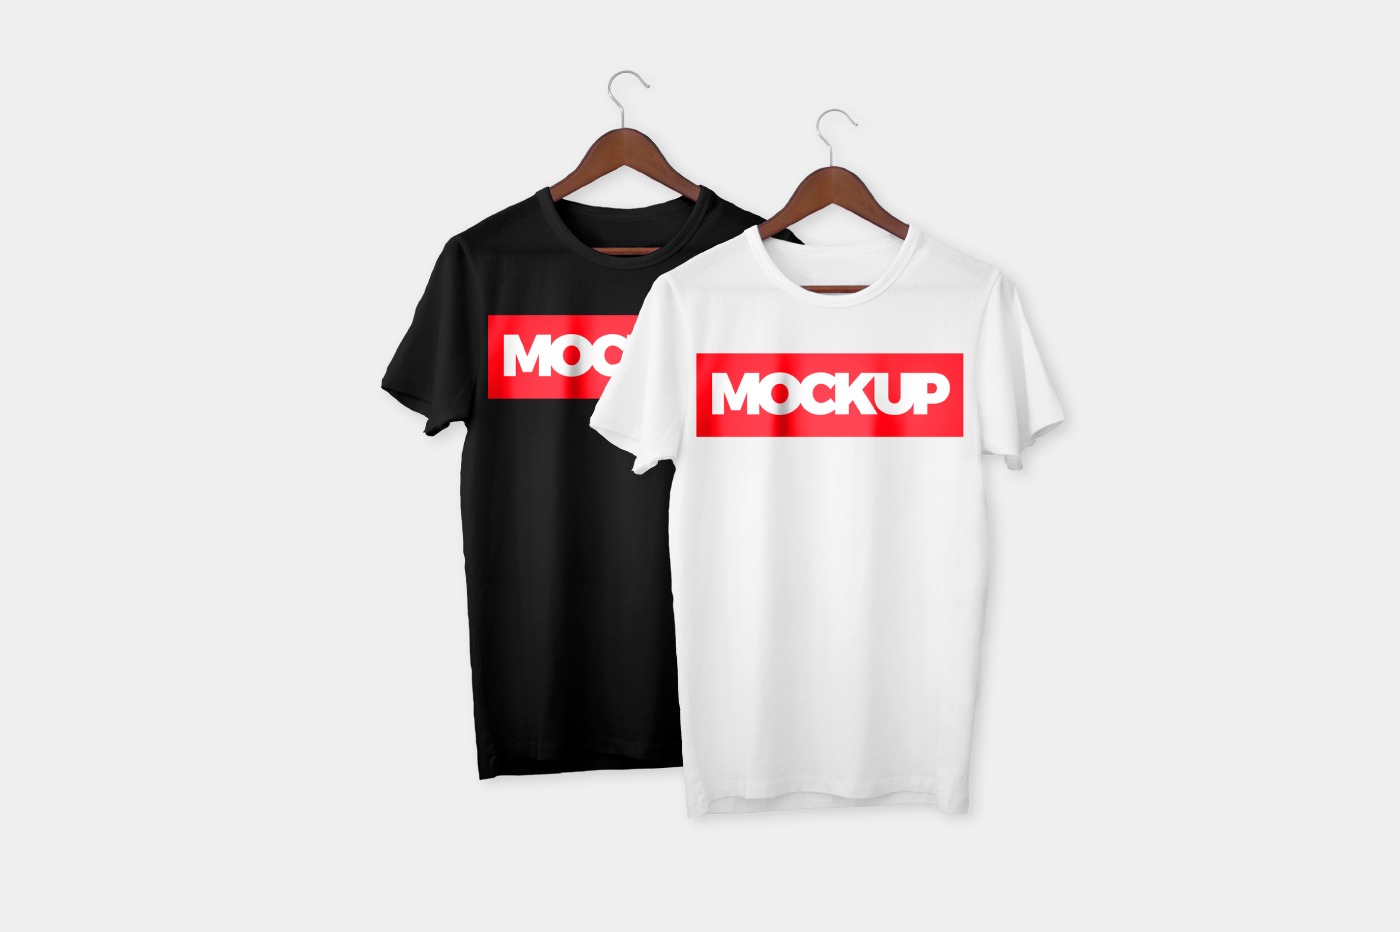 Download FREE T-SHIRT MOCKUP | FOR PHOTOSHOP PSD on Behance Free Mockups